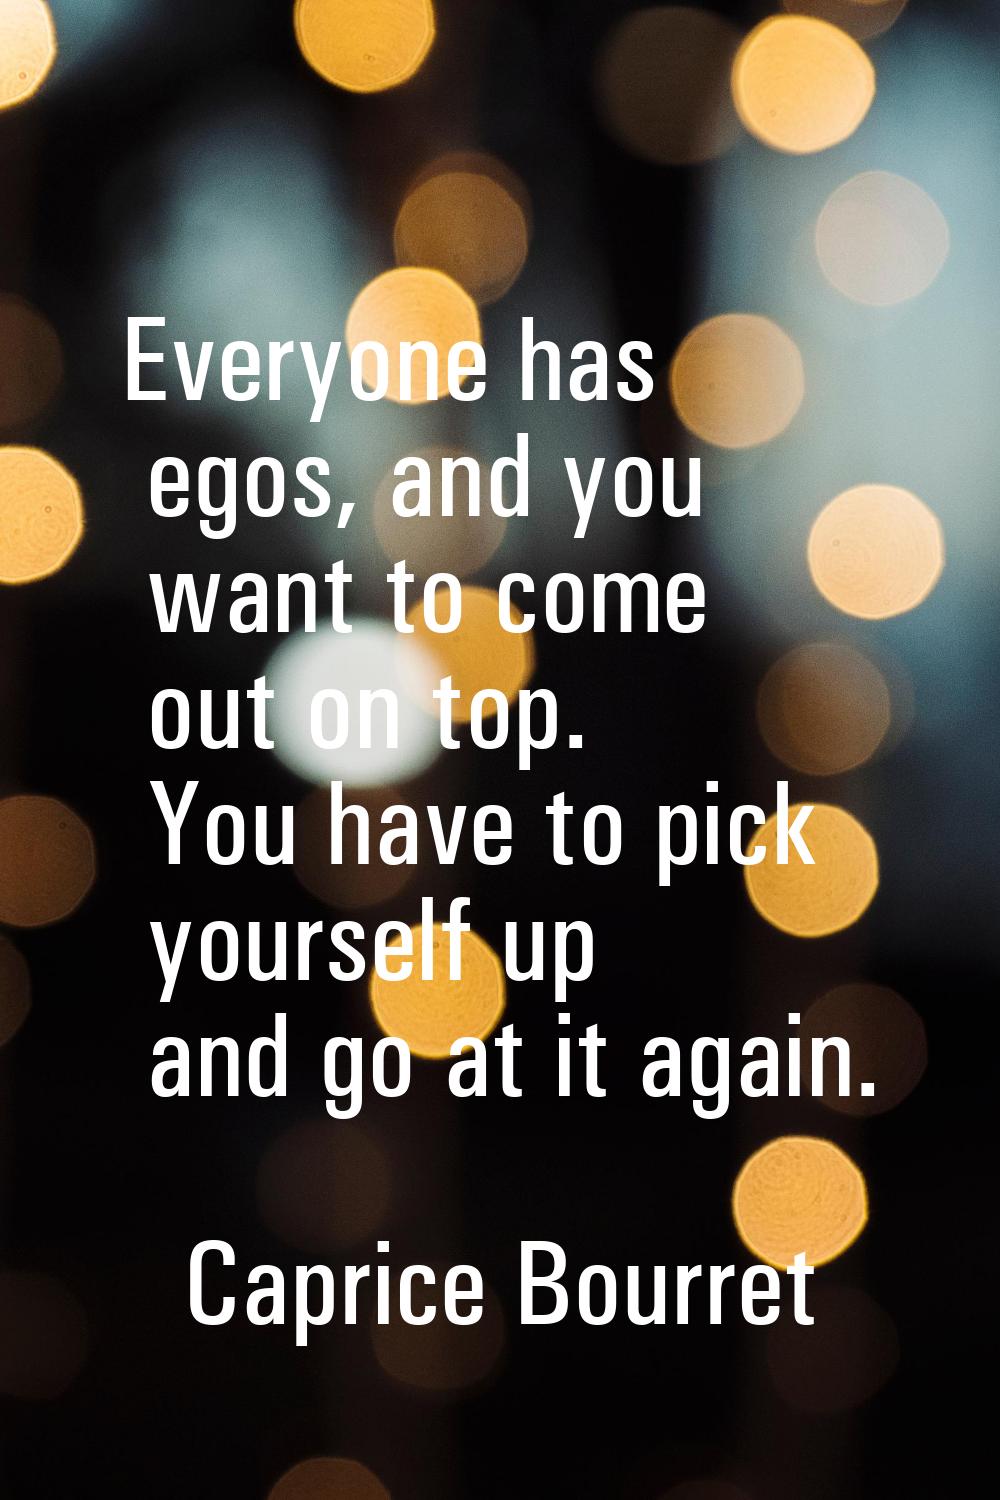 Everyone has egos, and you want to come out on top. You have to pick yourself up and go at it again